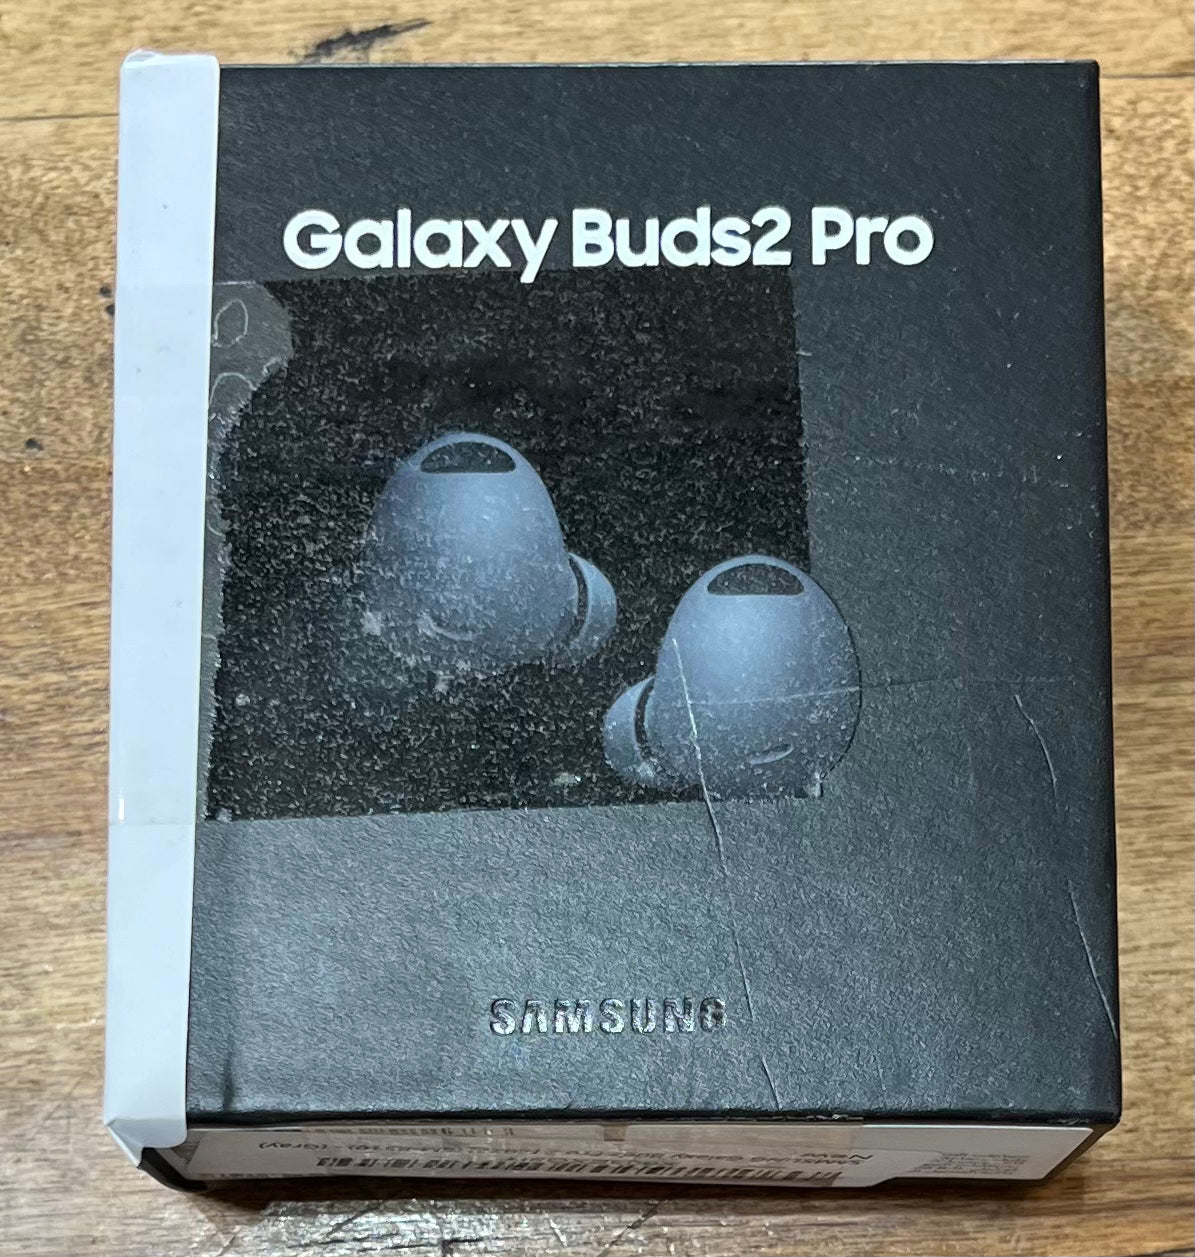 SAMSUNG Galaxy Buds 2 Pro True Wireless Bluetooth Earbuds, Noise Cancelling - $125